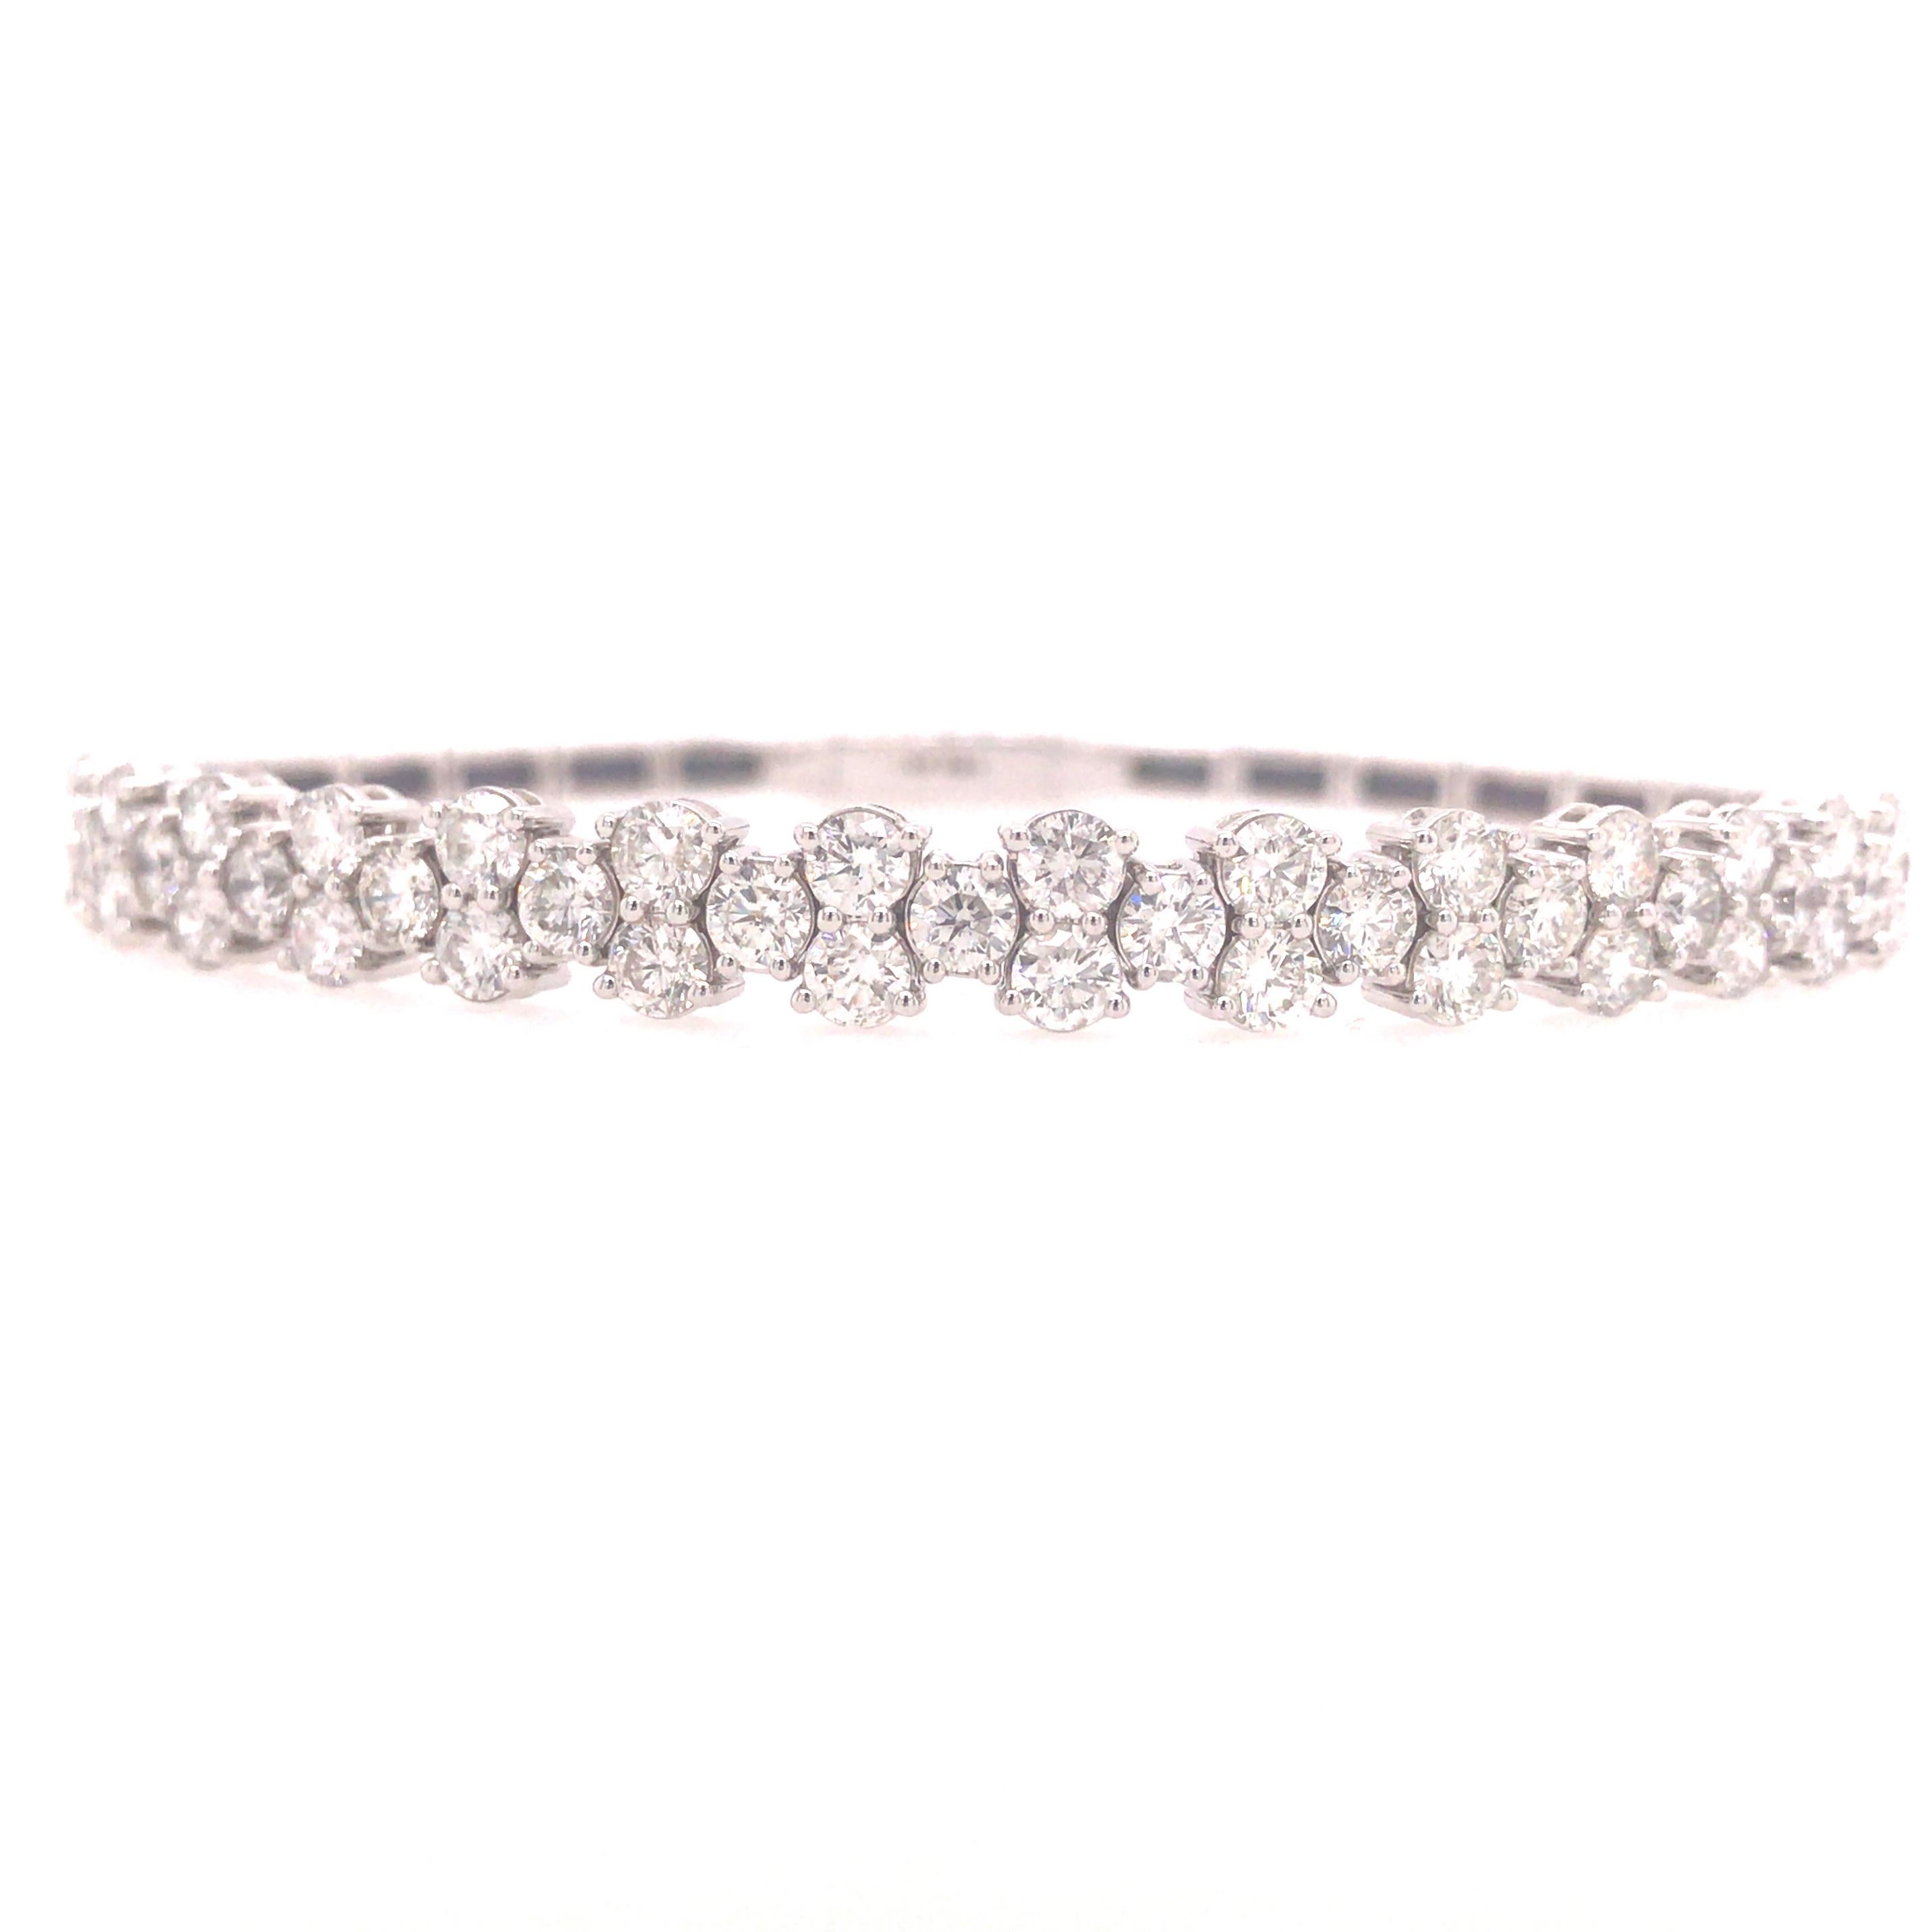 Flexible Diamond Bangle in 14K White Gold.  Round Brilliant Cut Diamonds weighing 3.90 carat total weight, G-H in color and VS in clarity are expertly set.  The Bracelet measures 6 1/2 inches and 1/4 inch in width at the widest point.  Lock closure.